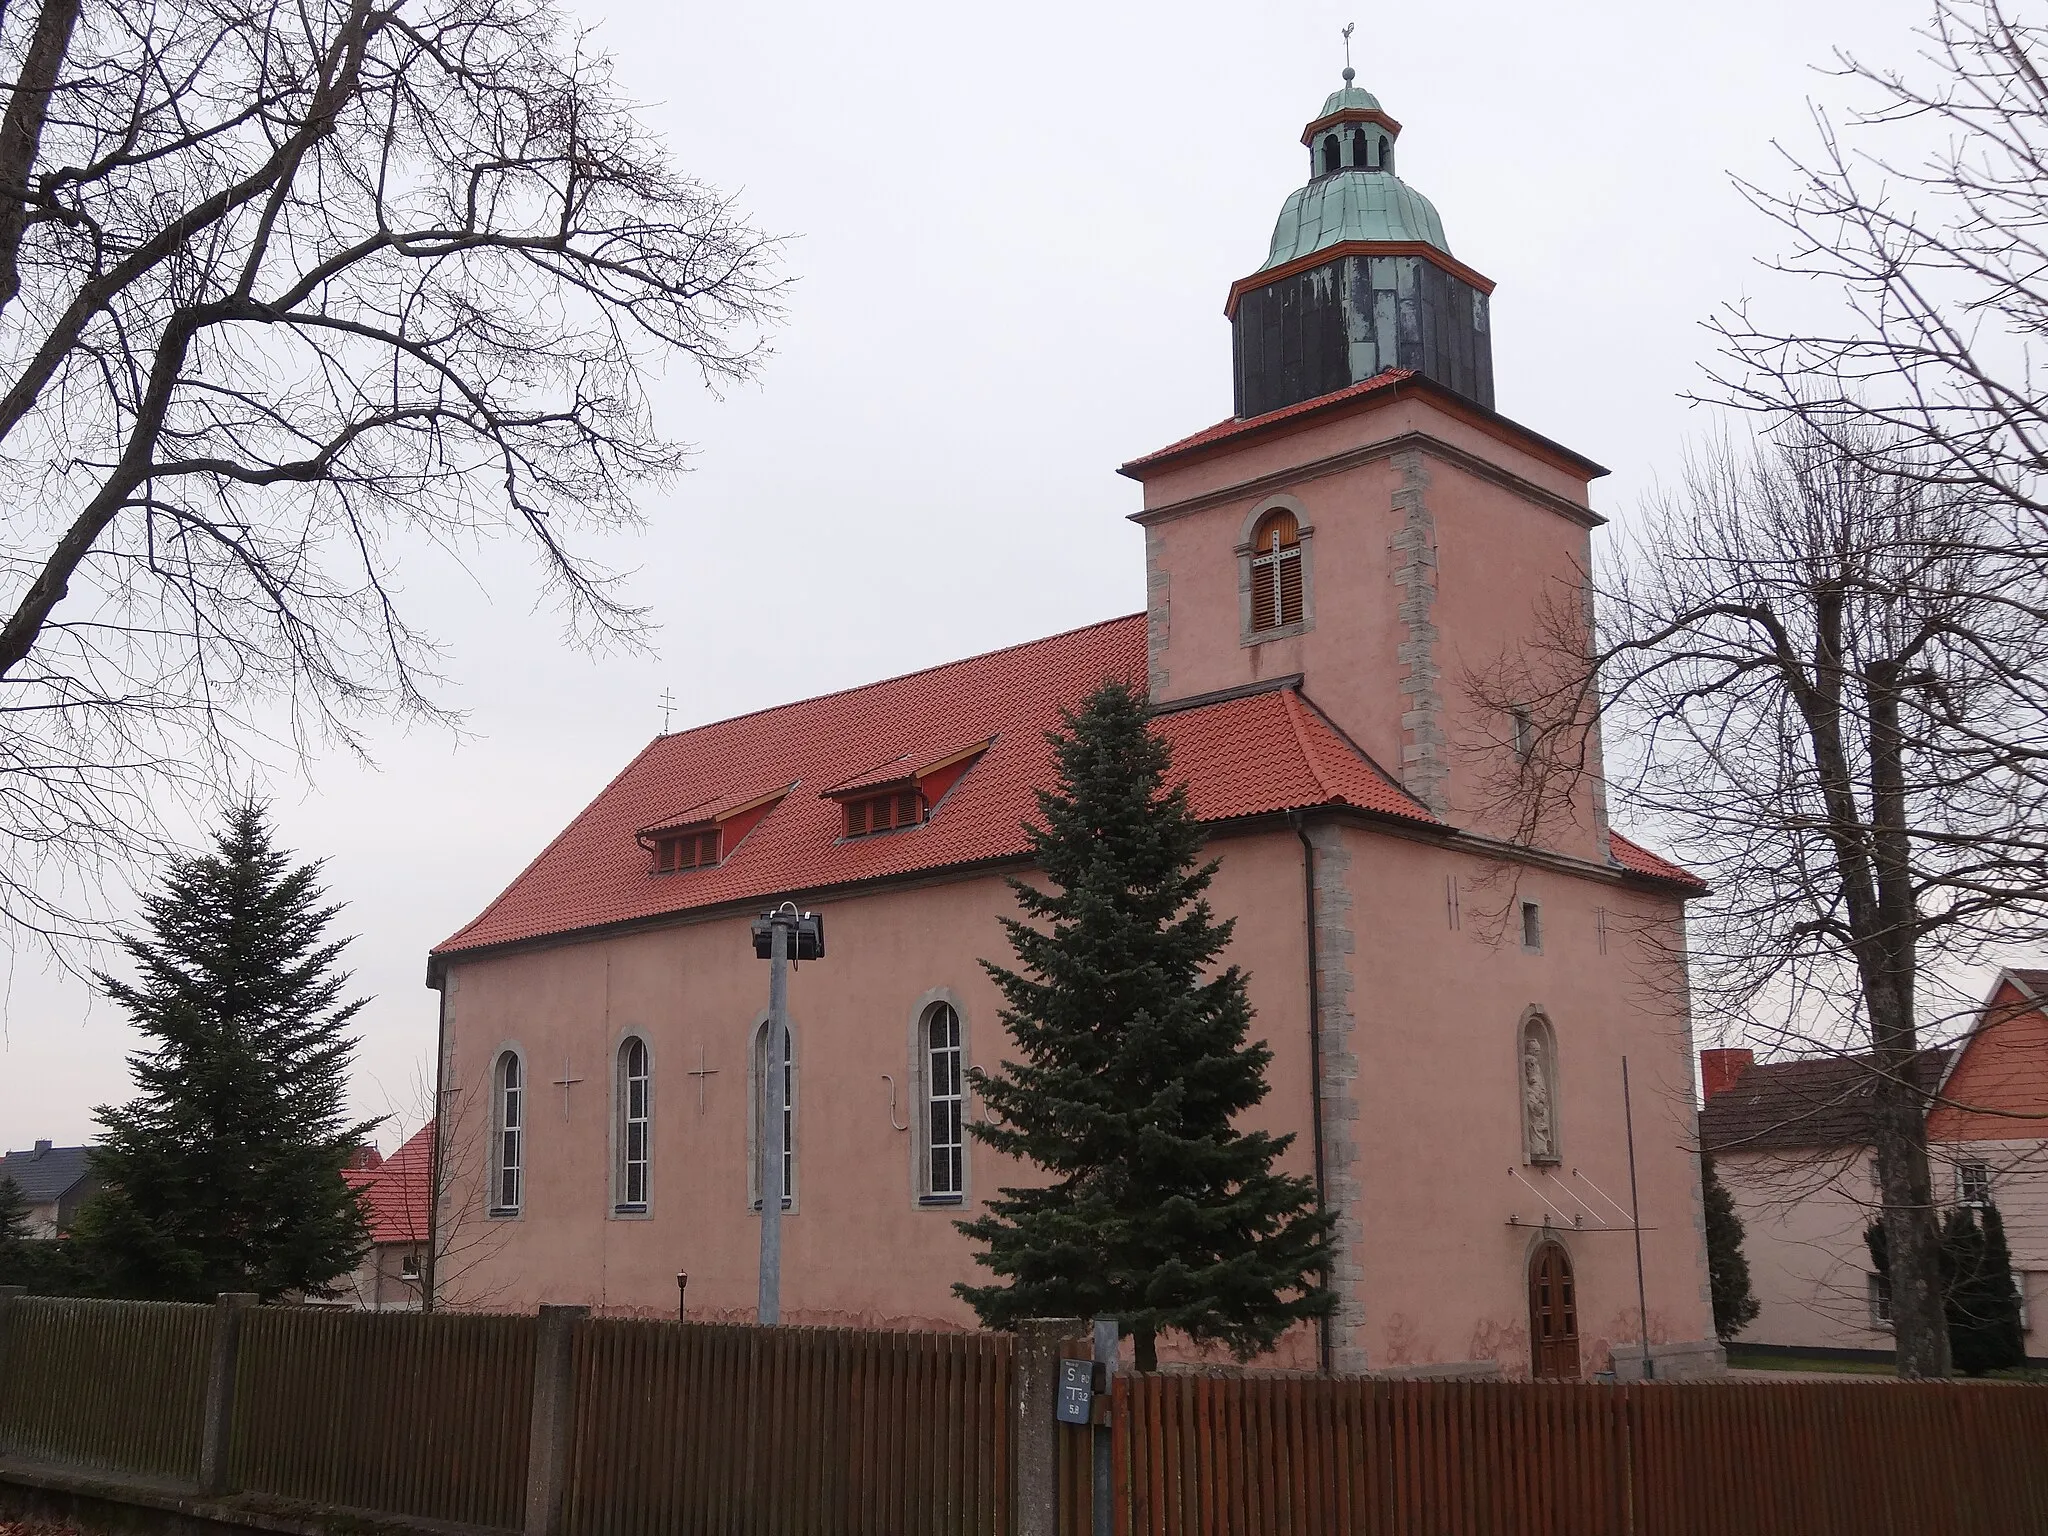 Photo showing: Church in Hüpstedt, Thuringia, Germany